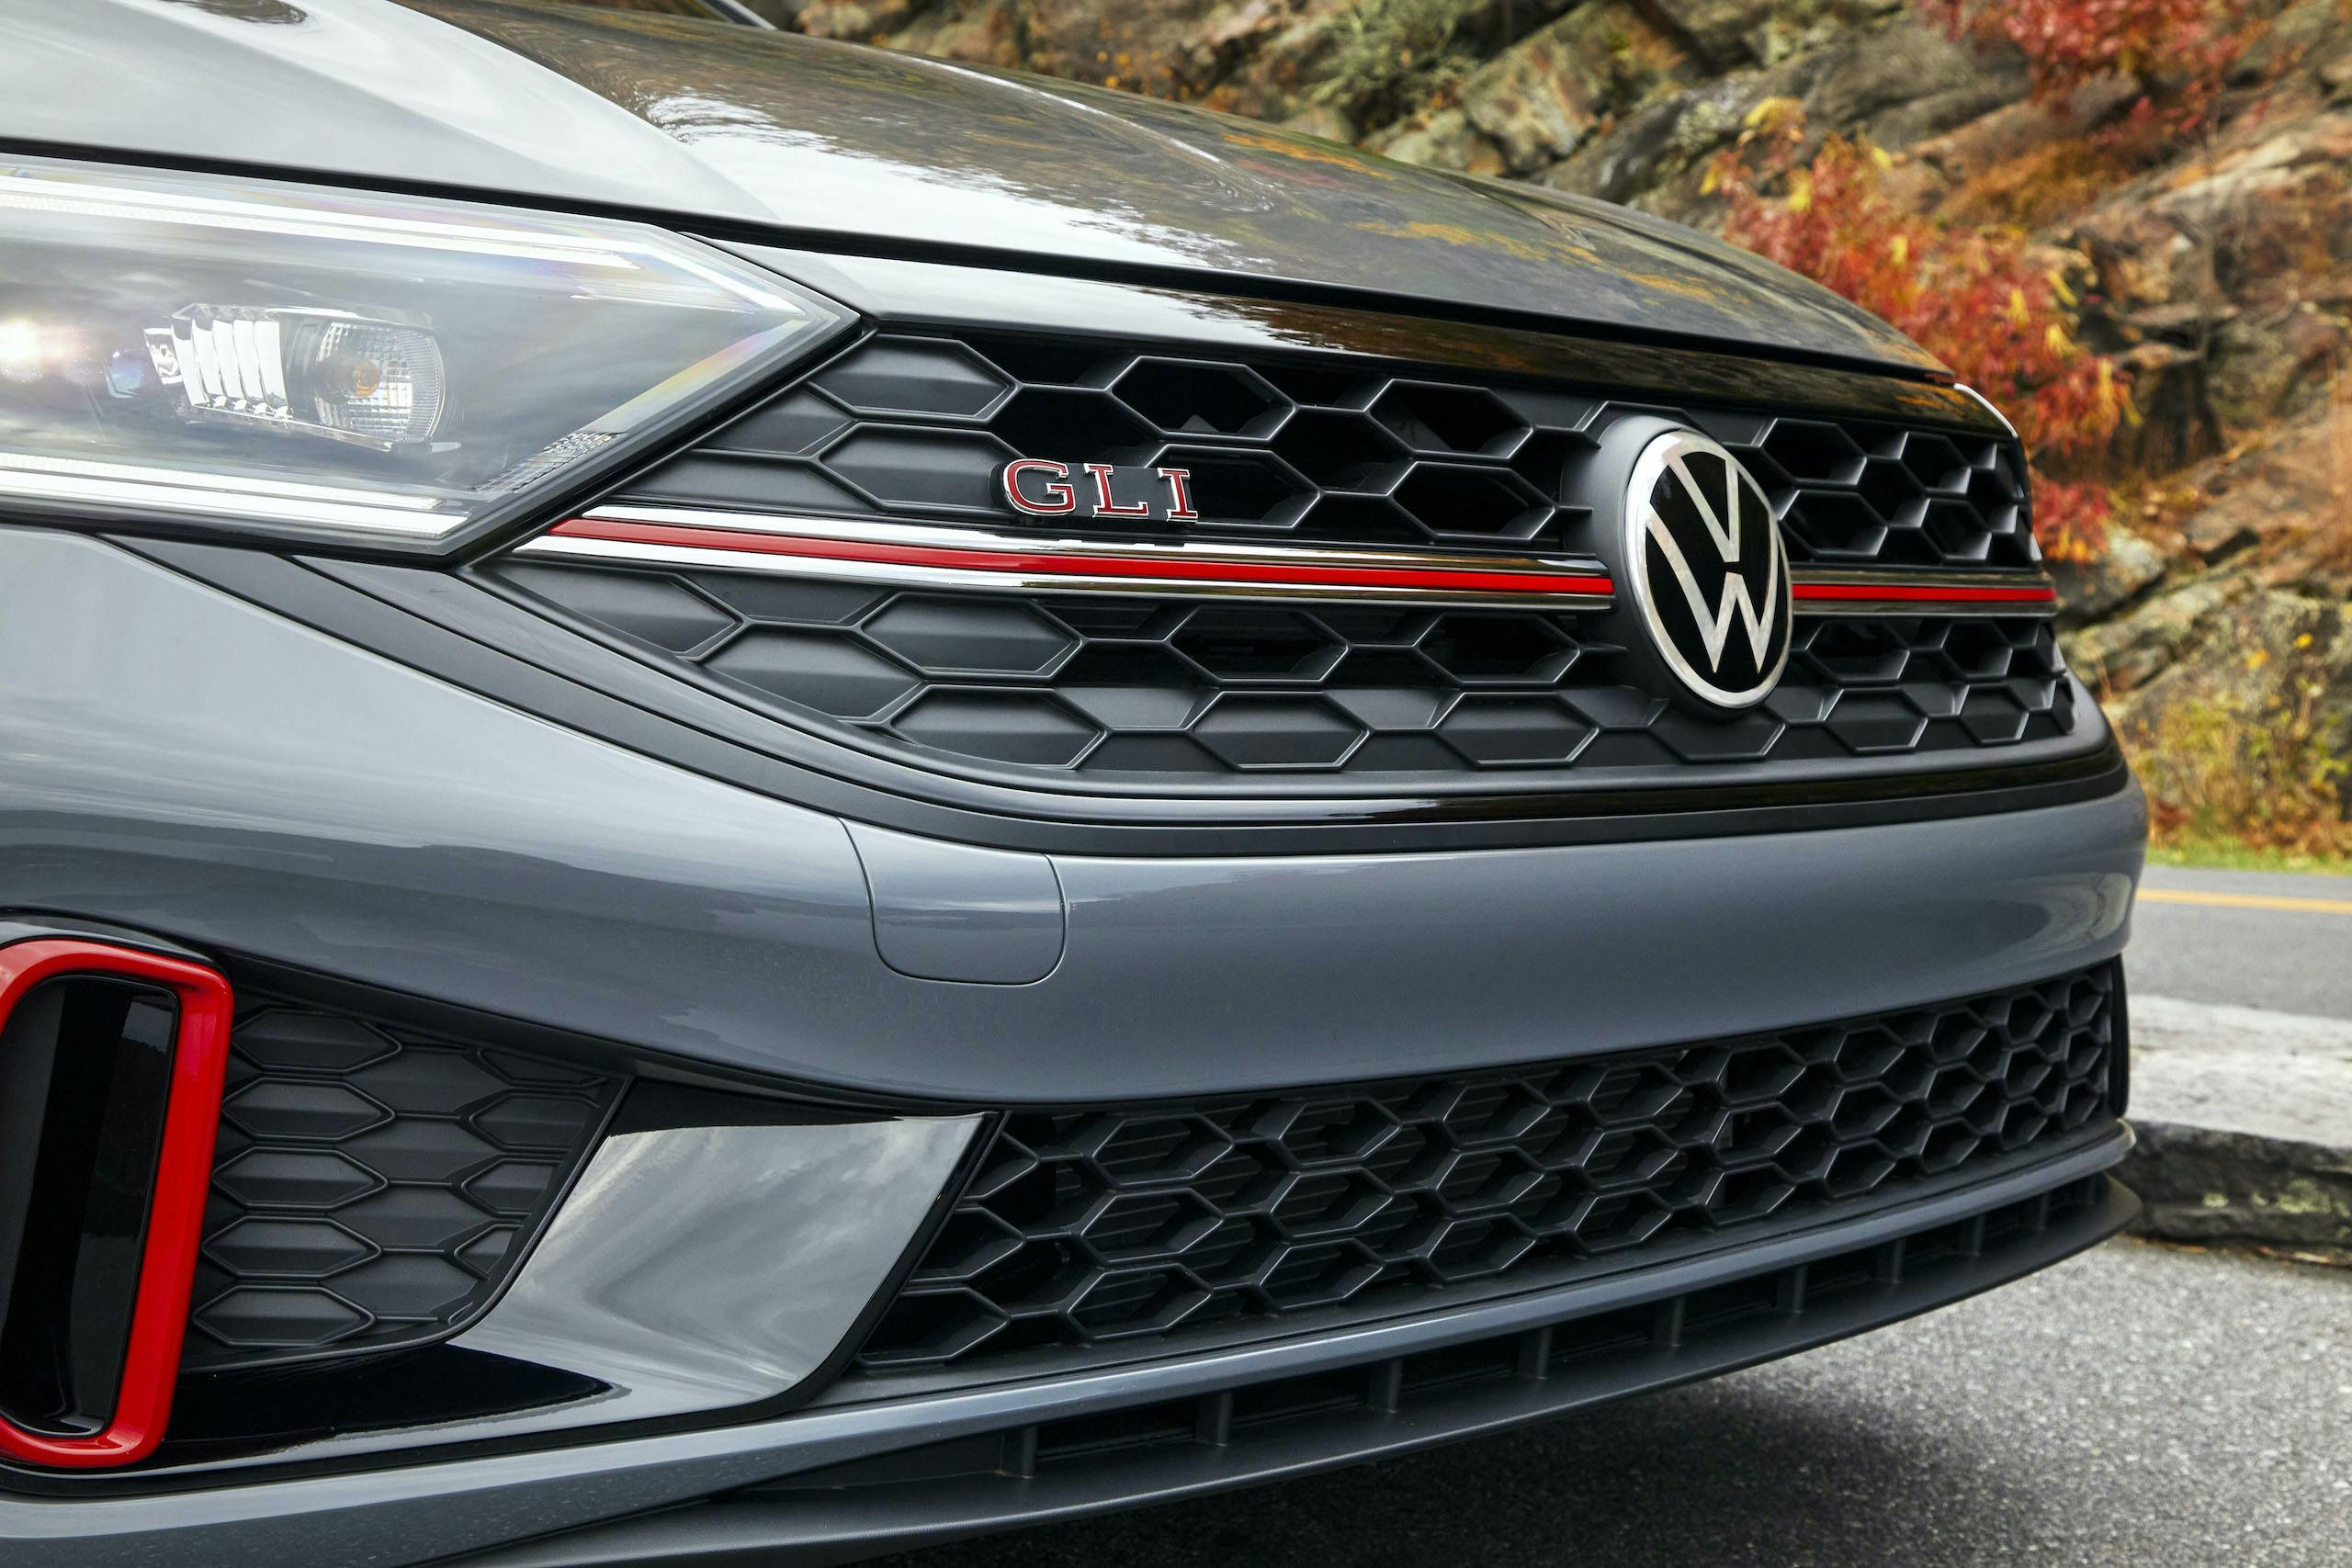 2022 VW Golf GLI front grille